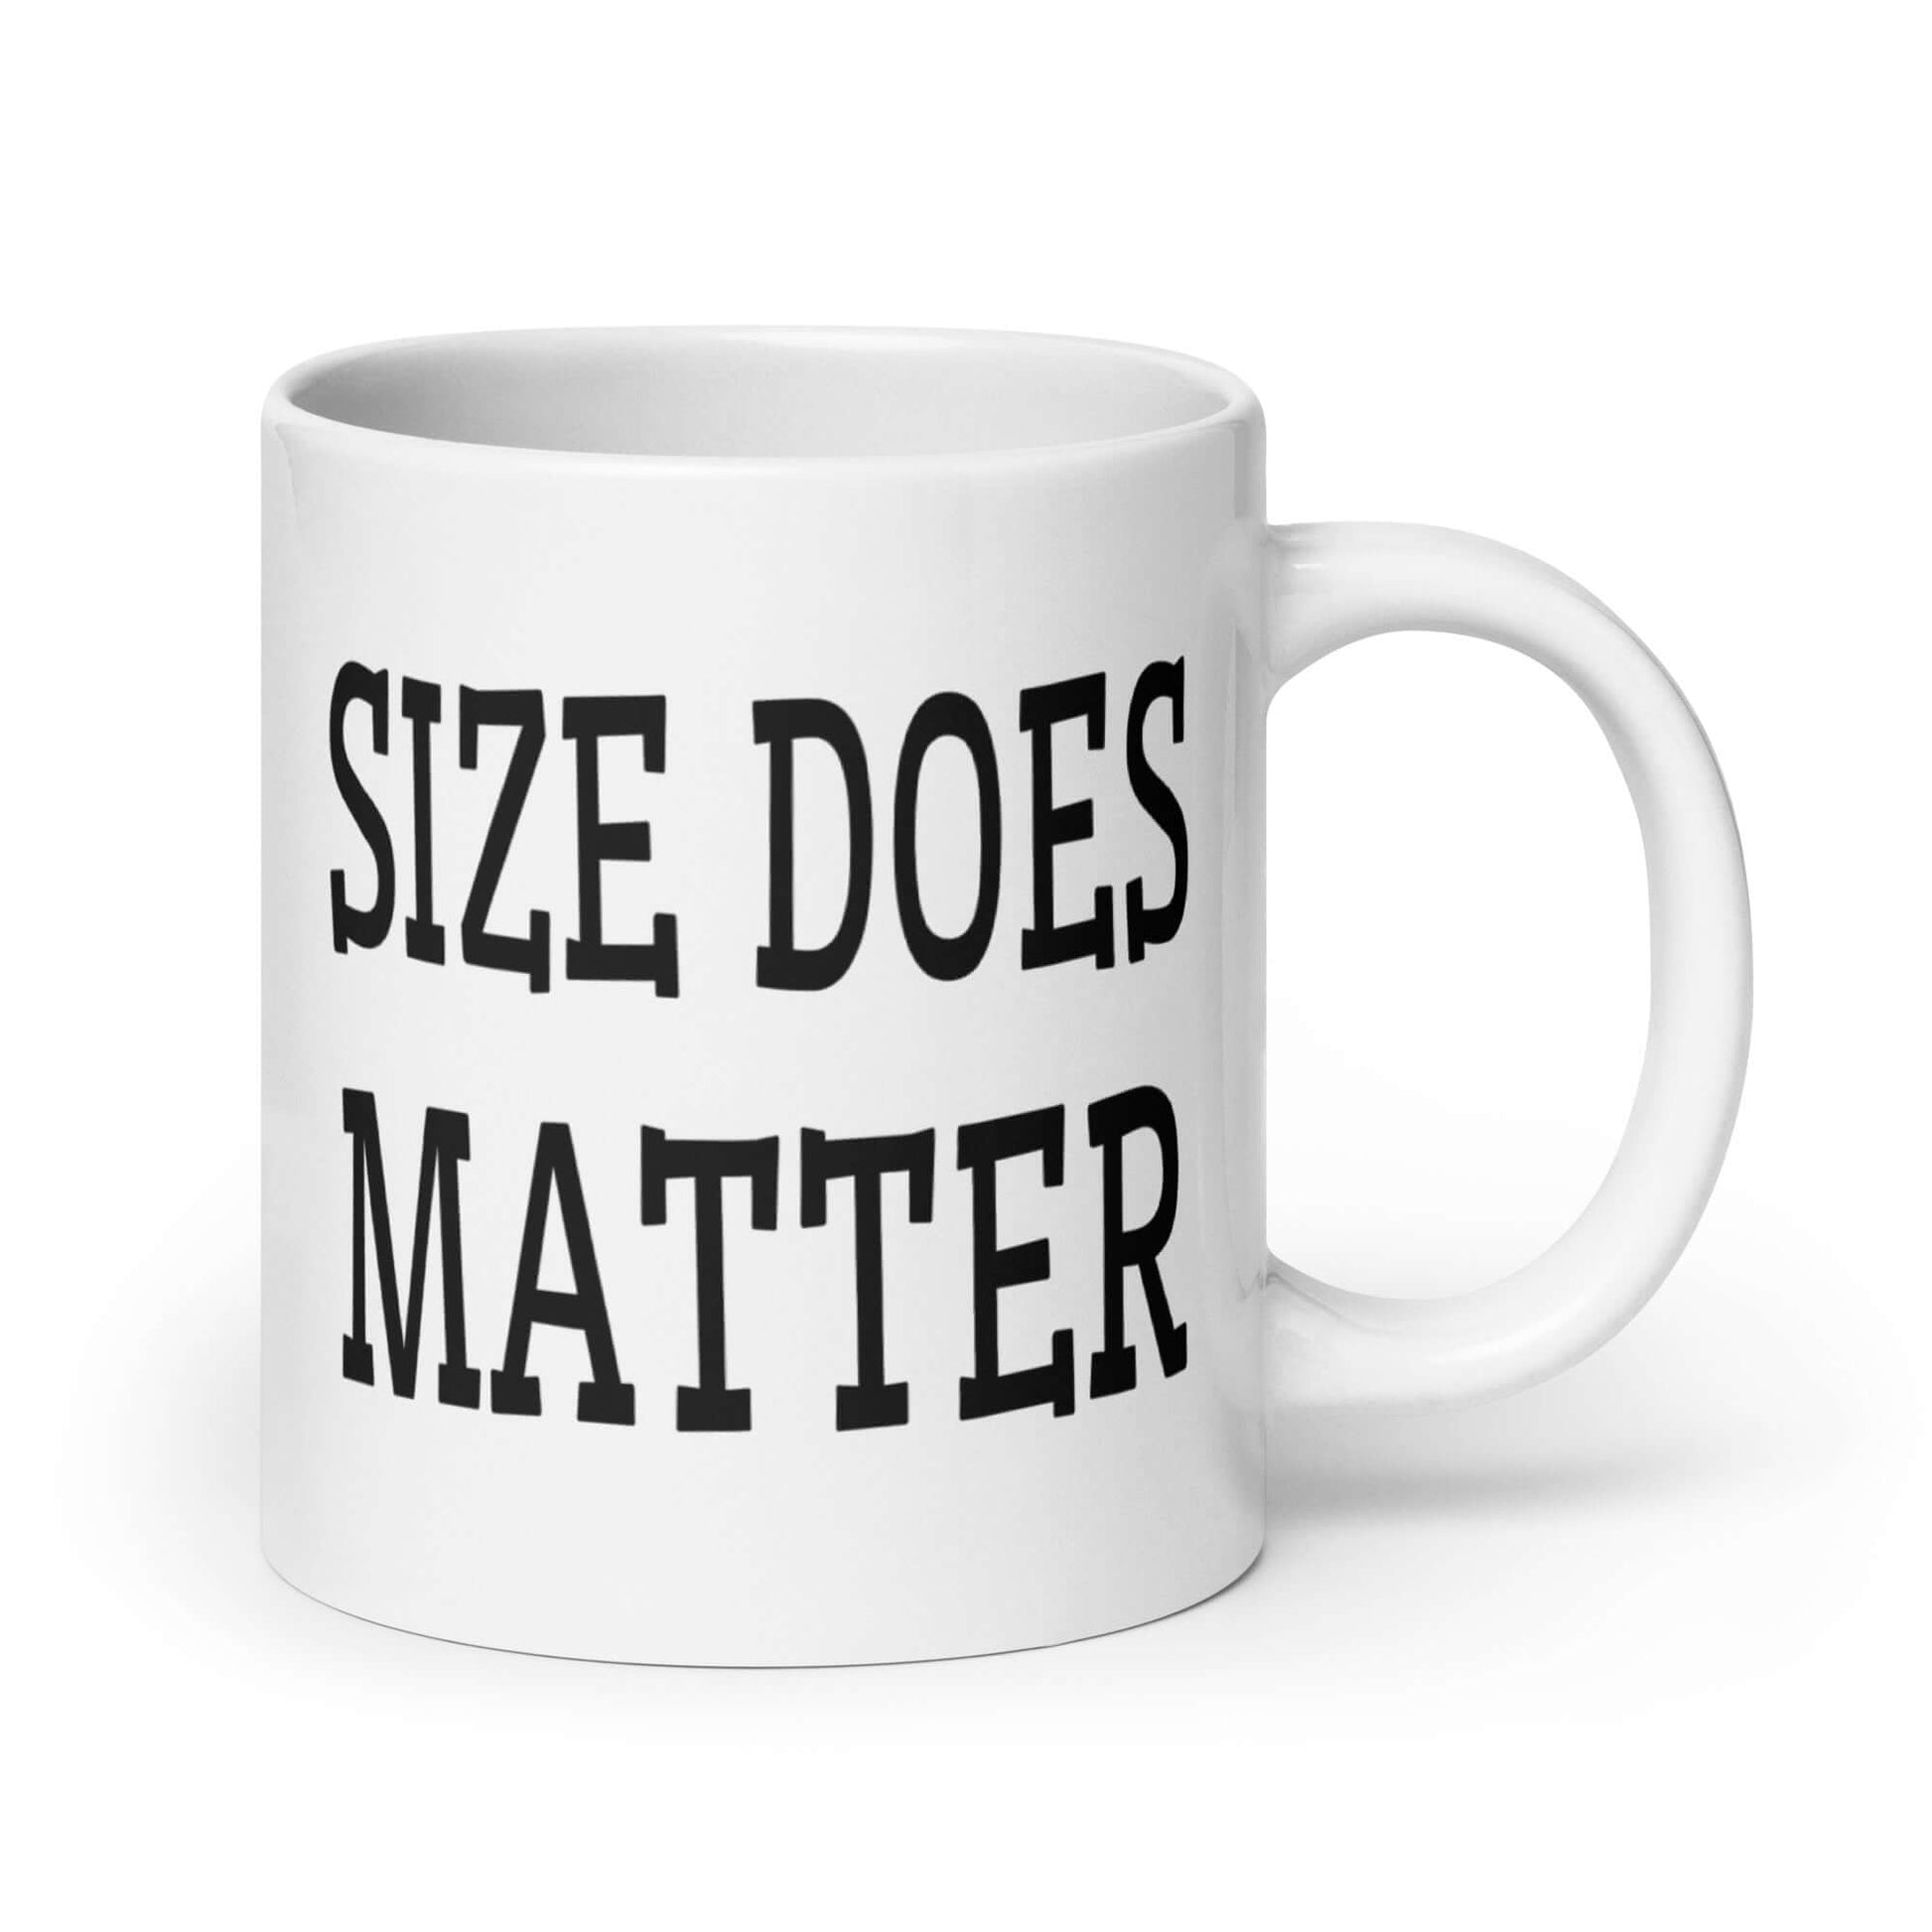 White ceramic coffee mug with the words size does matter printed on both sides.